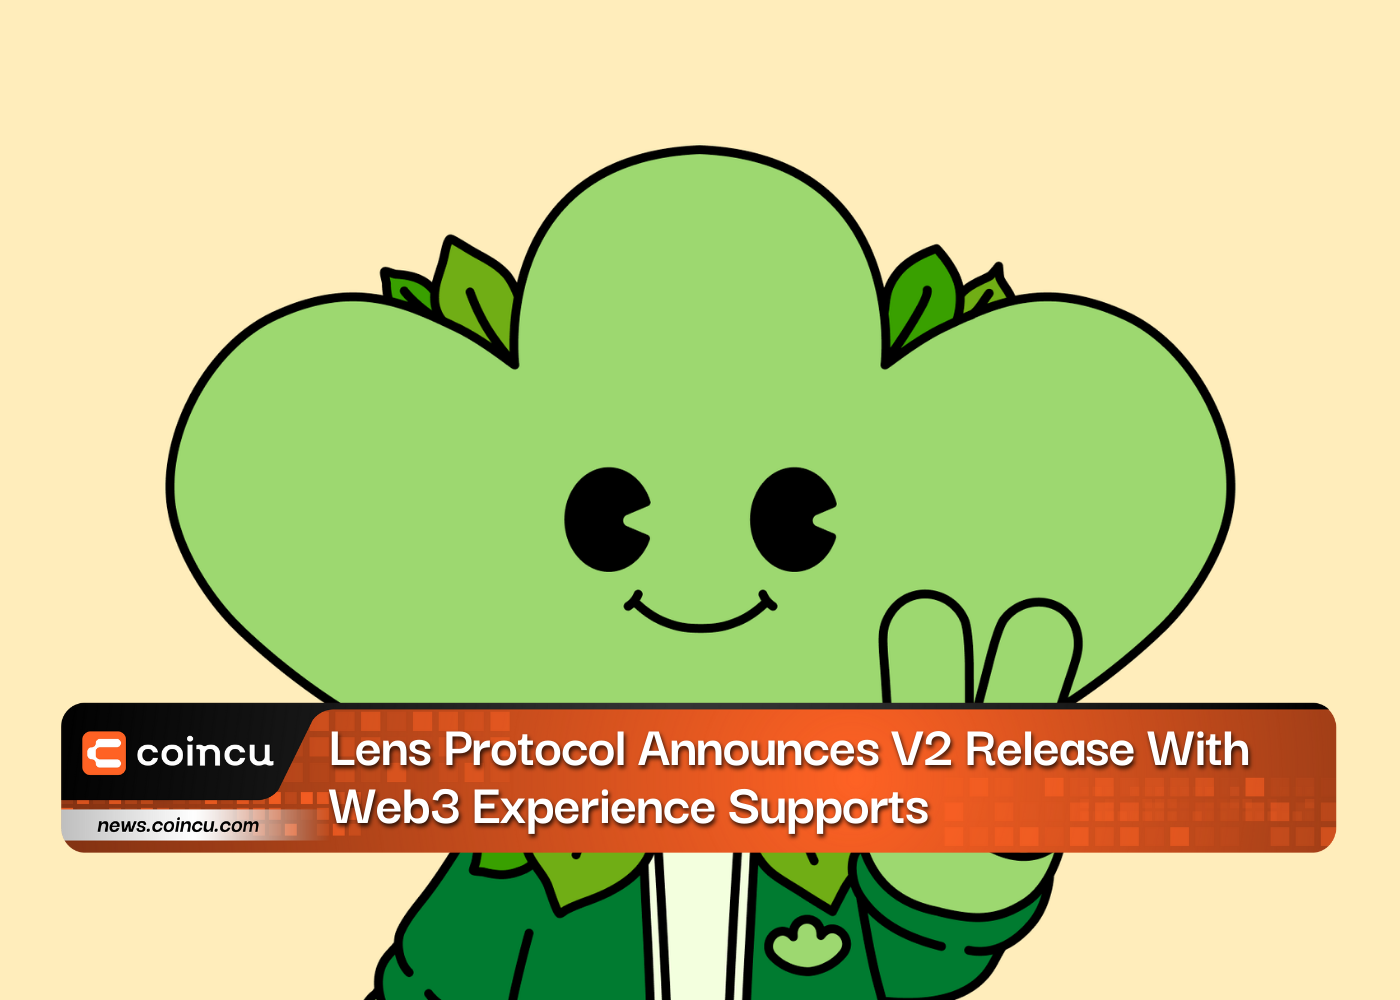 Lens Protocol Announces V2 Release With Web3 Experience Supports